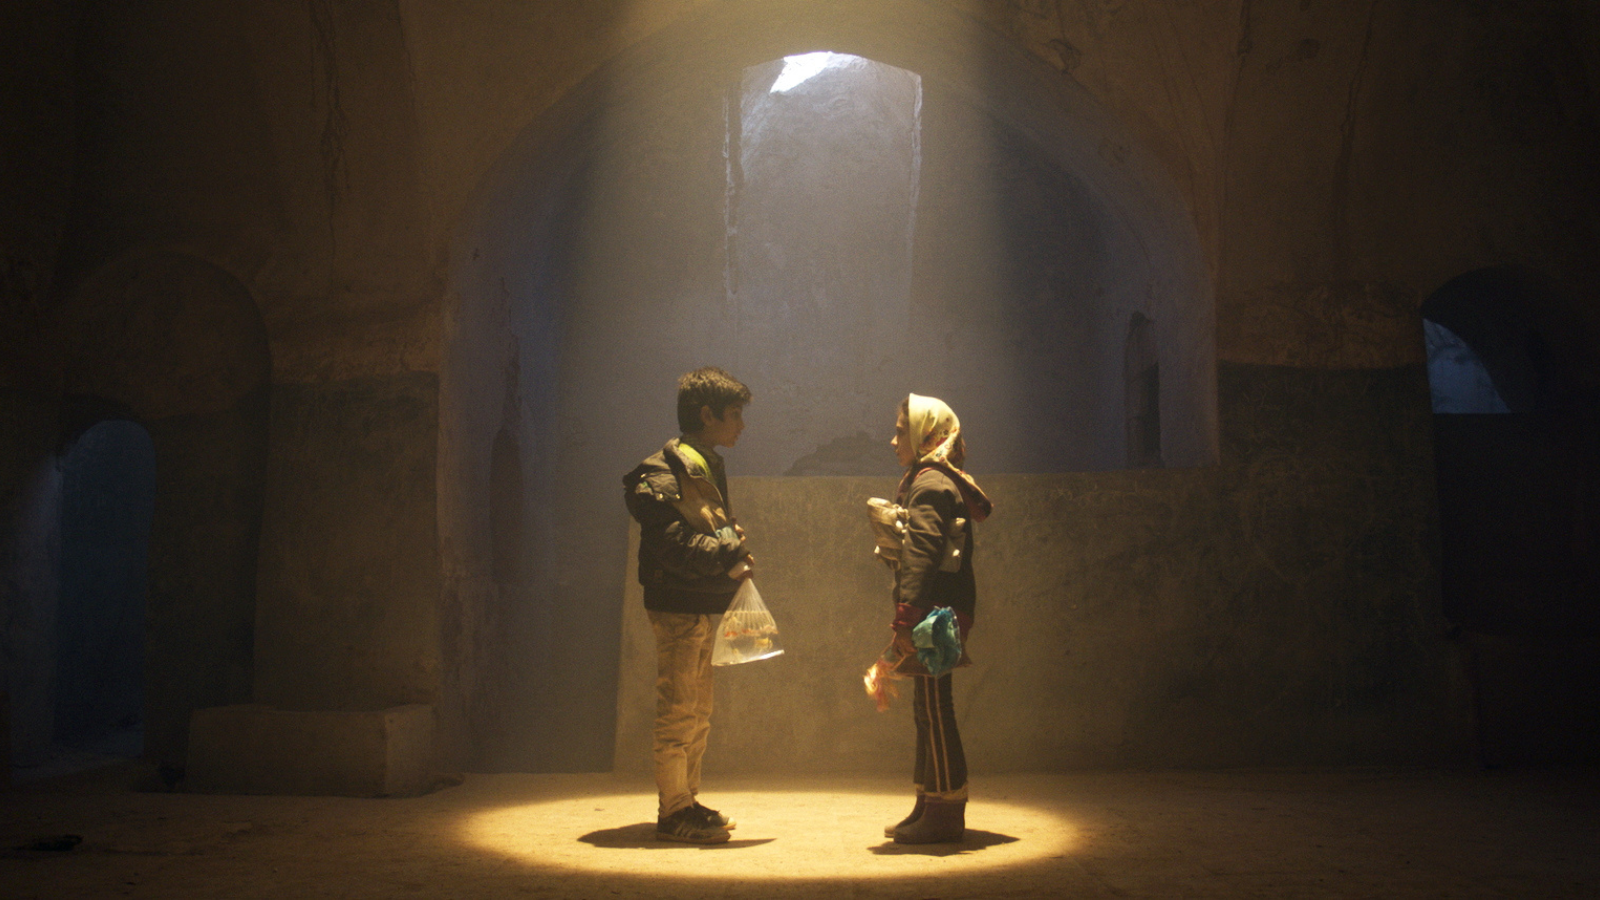 A Still from Hamam. A young boy (Yahya) and a young girl (Leila) stand facing each other, illuminated by a bright white spotlight